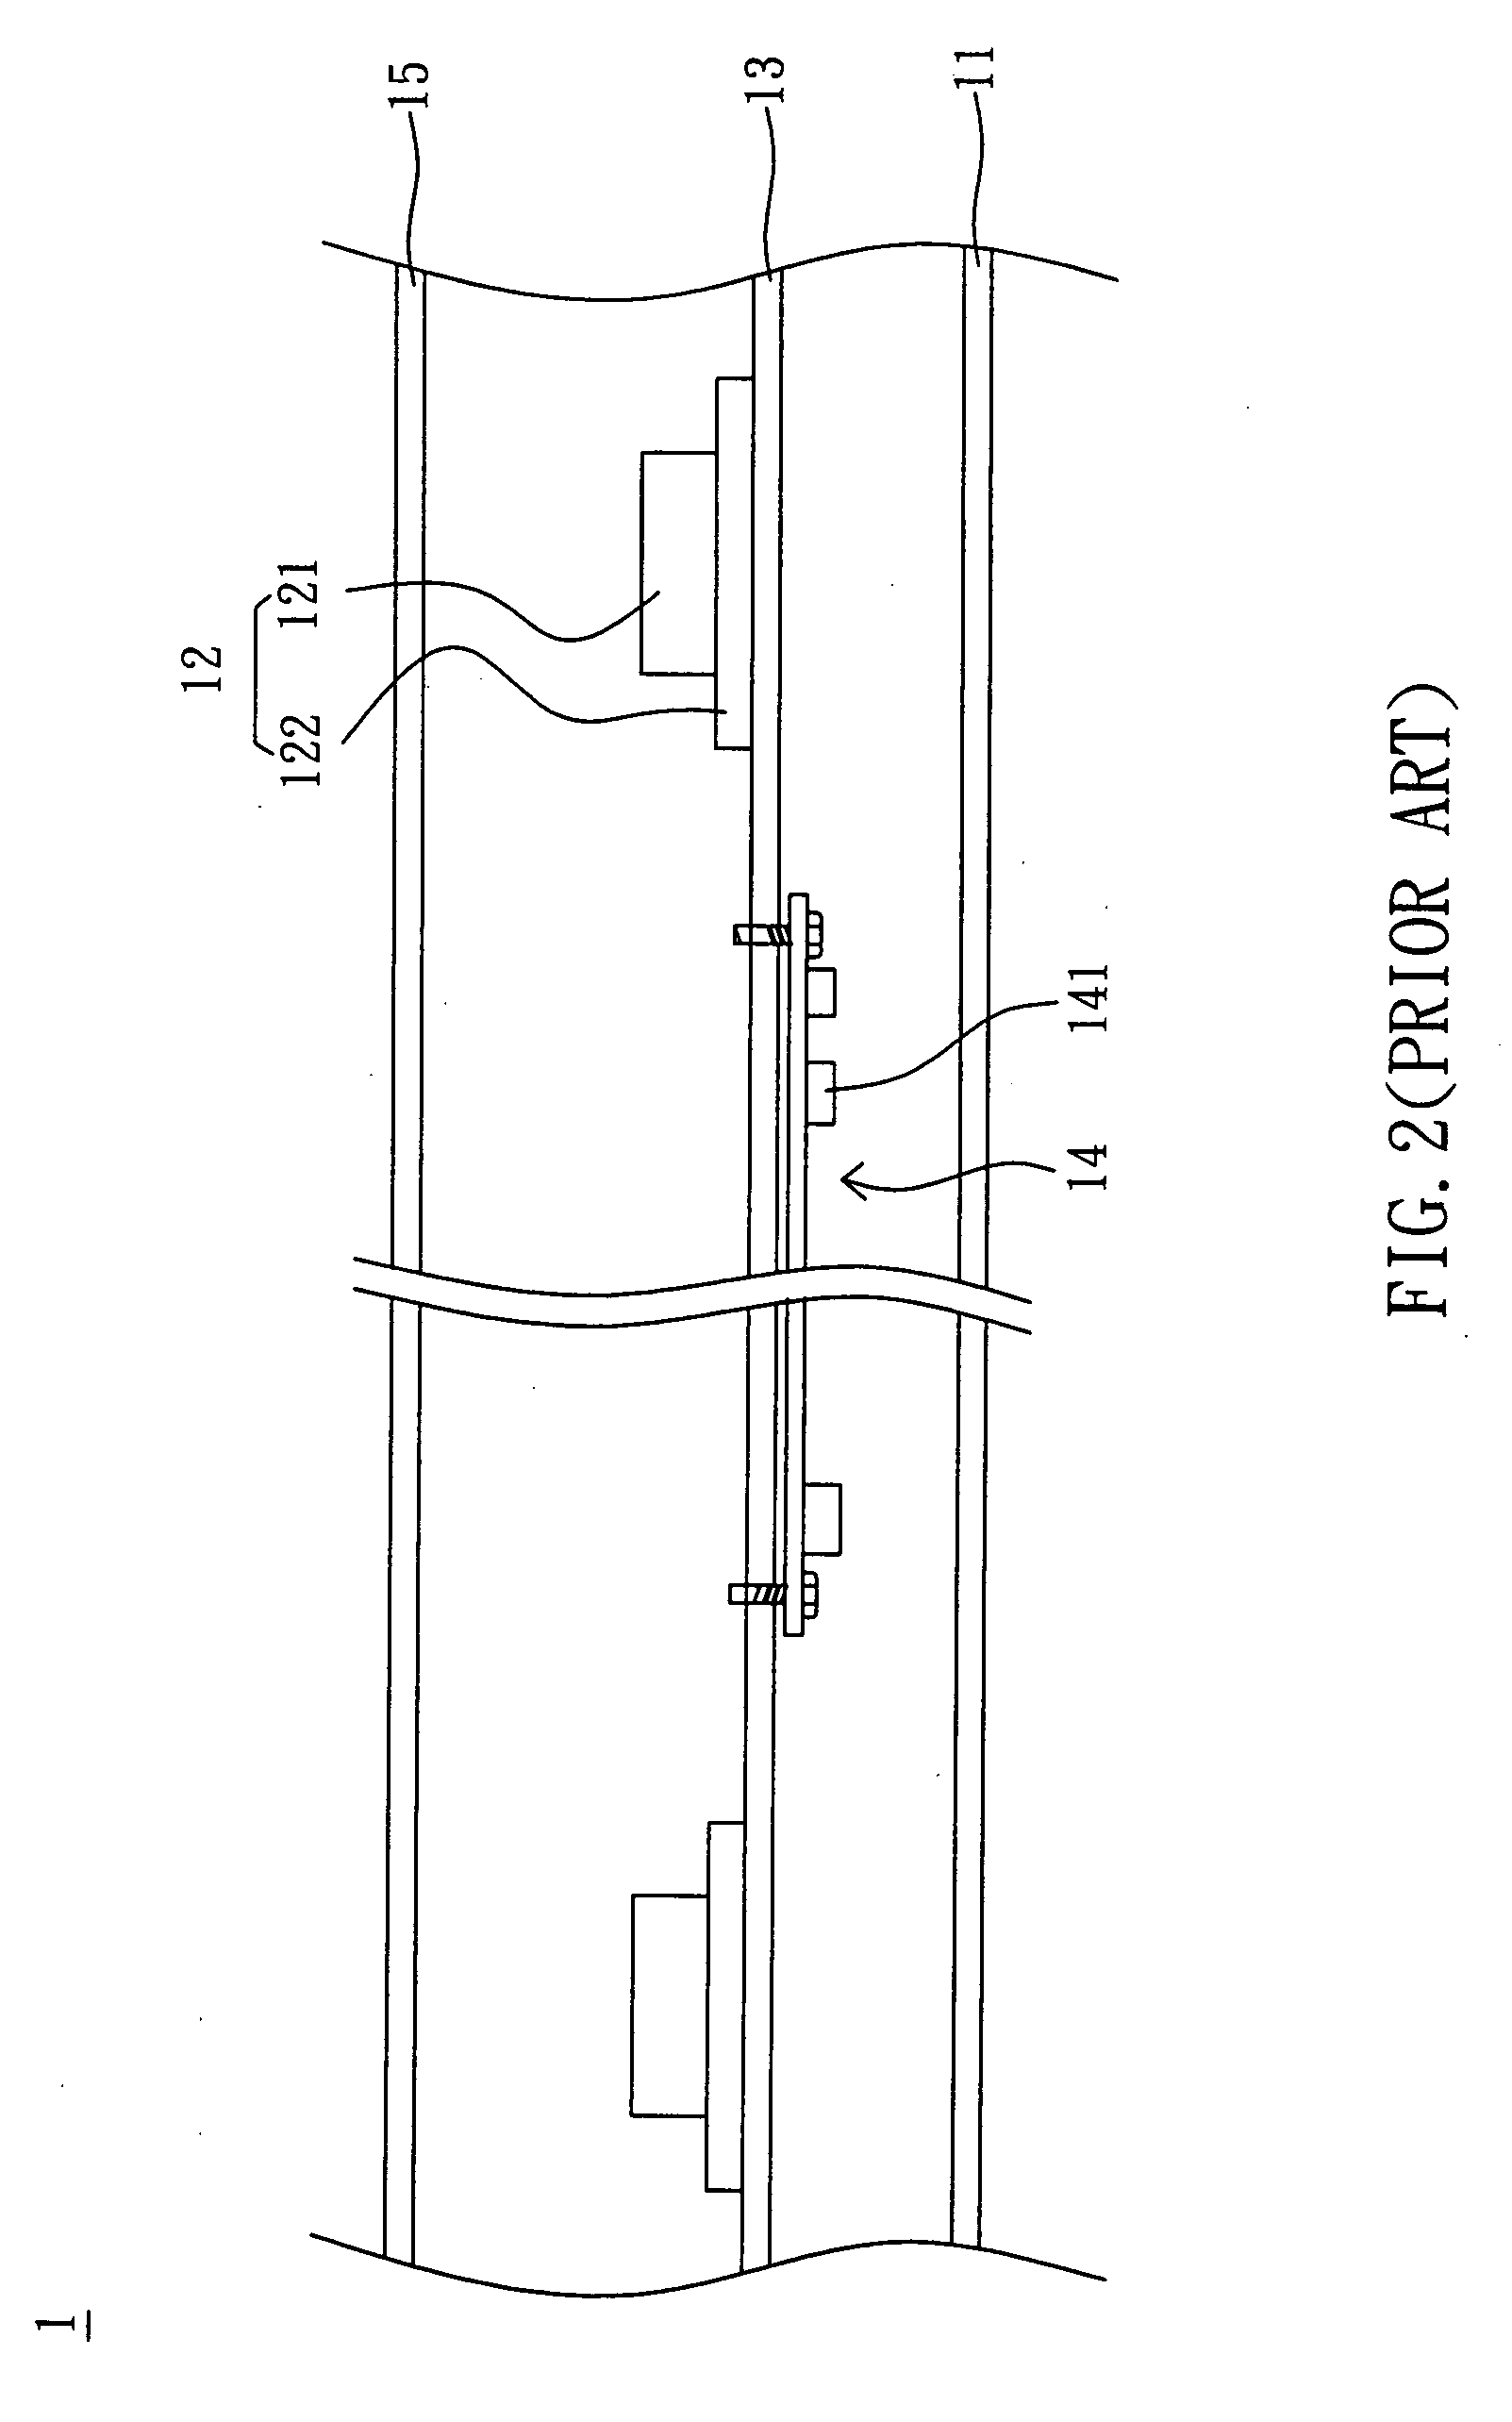 Package module of light emitting diode